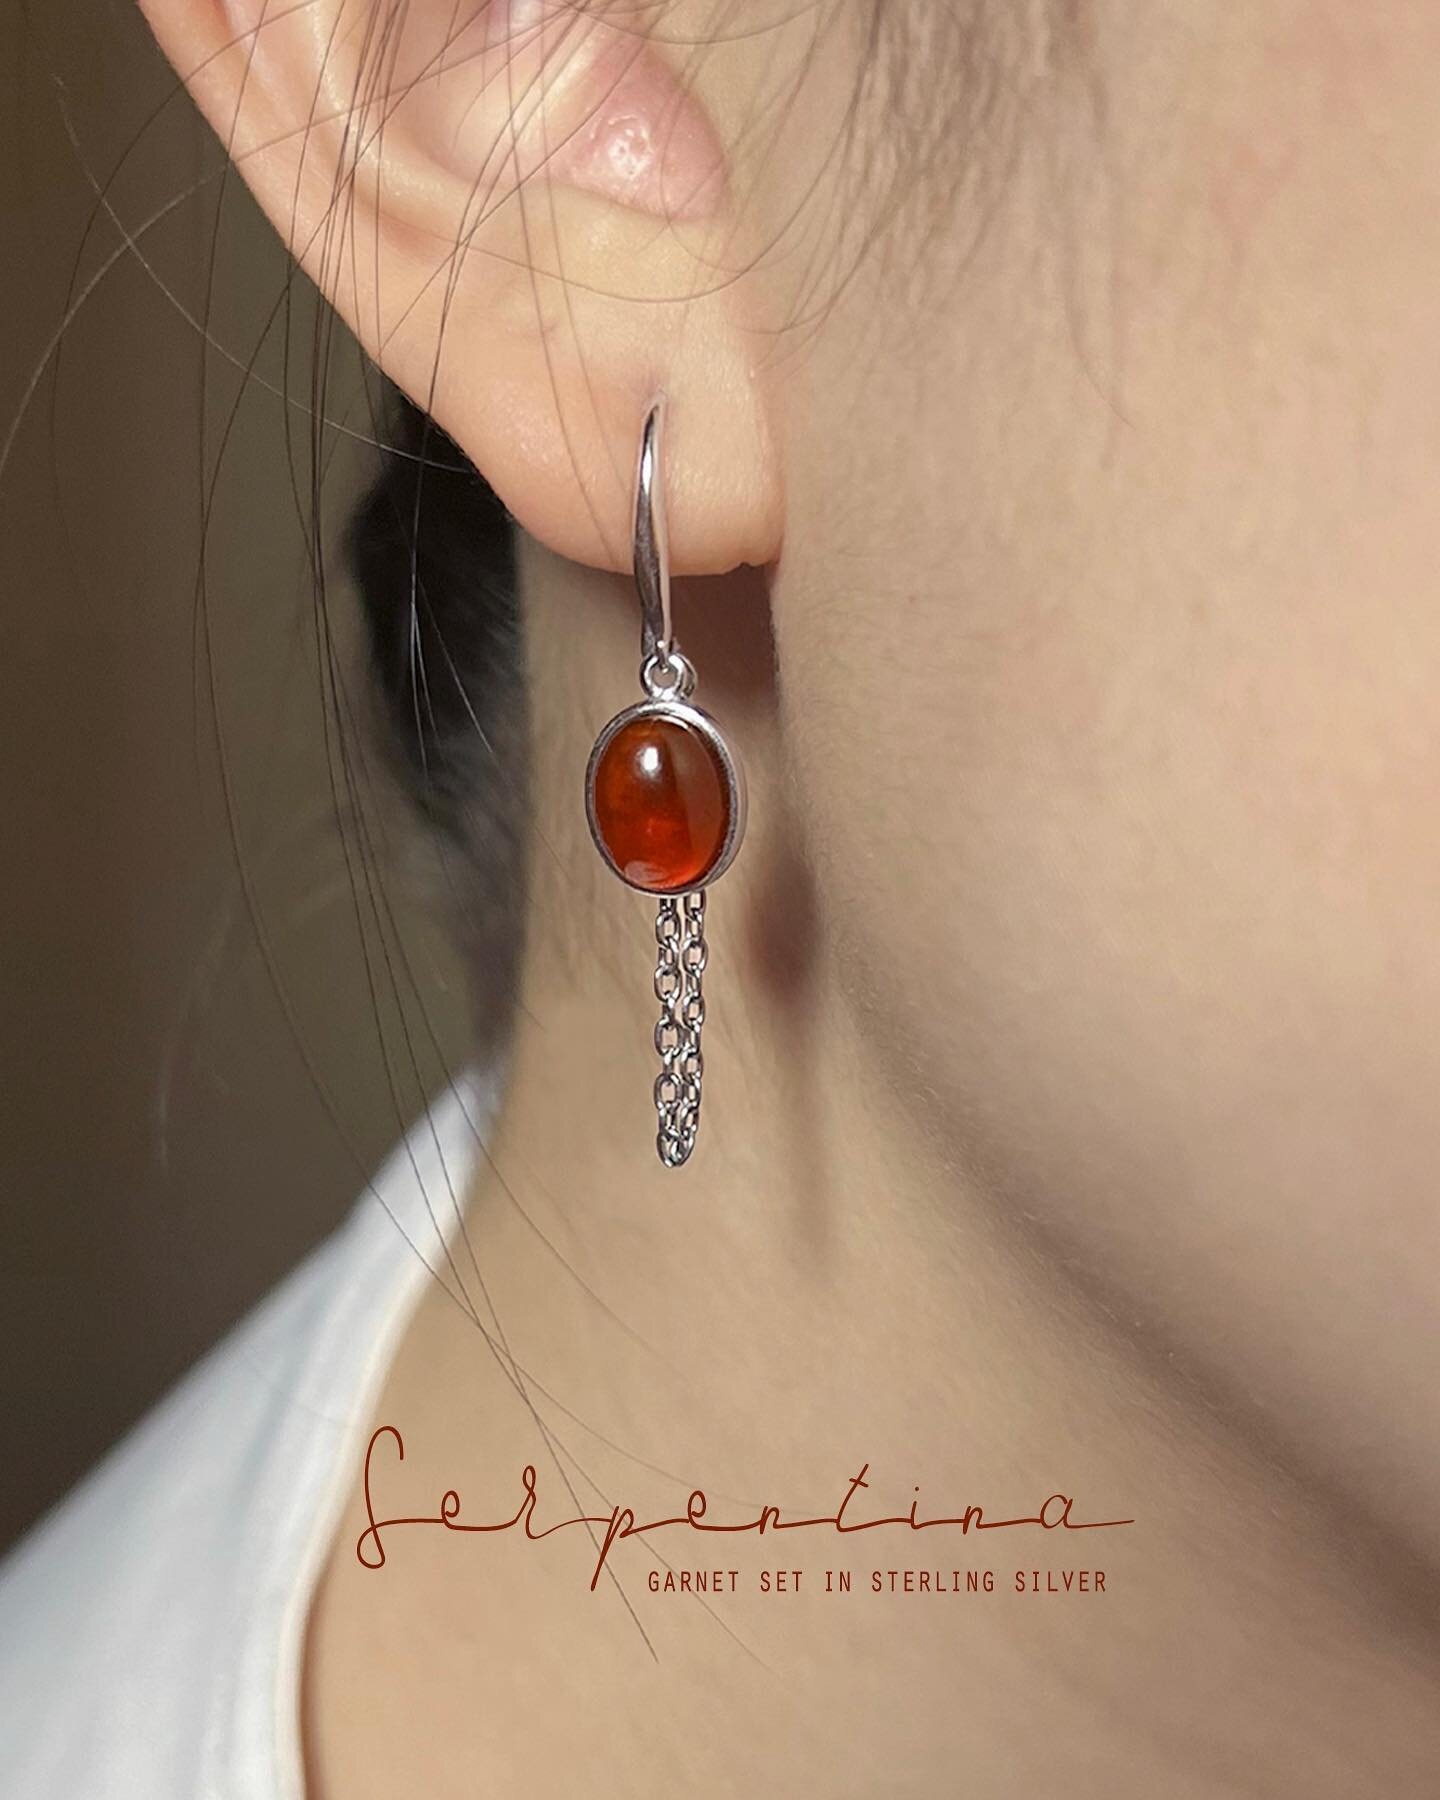 .
🥀Serpentina 

🫧🧪 
The perfect concoction of elegance with a dash of danger! Amongst cultures, garnets are the symbol of power, fertility, divine feminine and the protection stone for war! 

。

Serpentina 
-garnet set in 925 Sterling silver

。 

